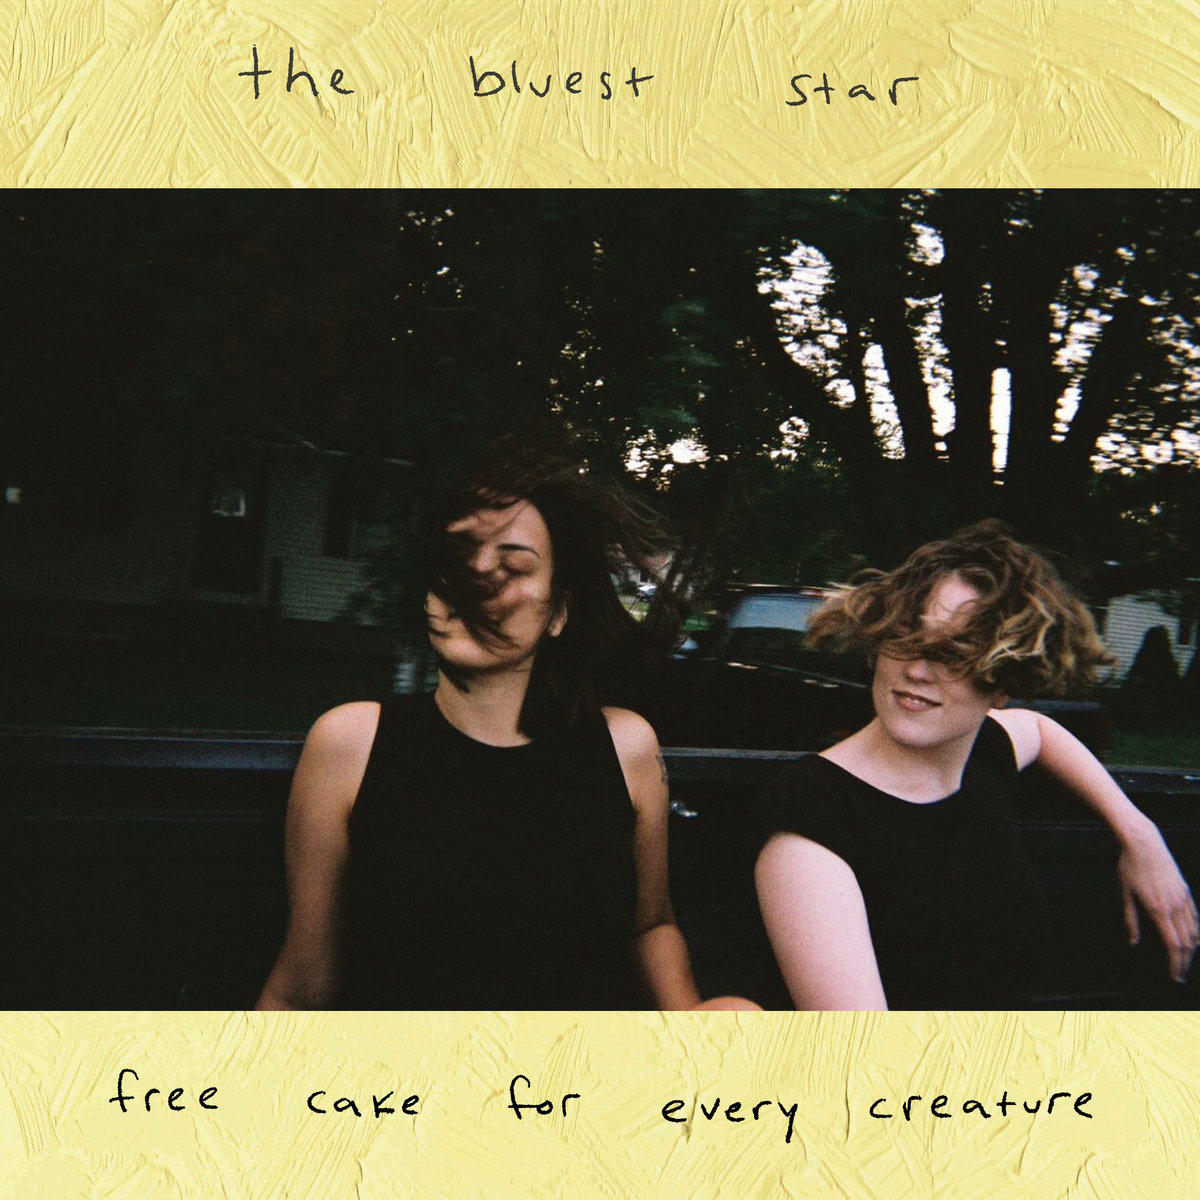 free cake for every creature bluest star album cover